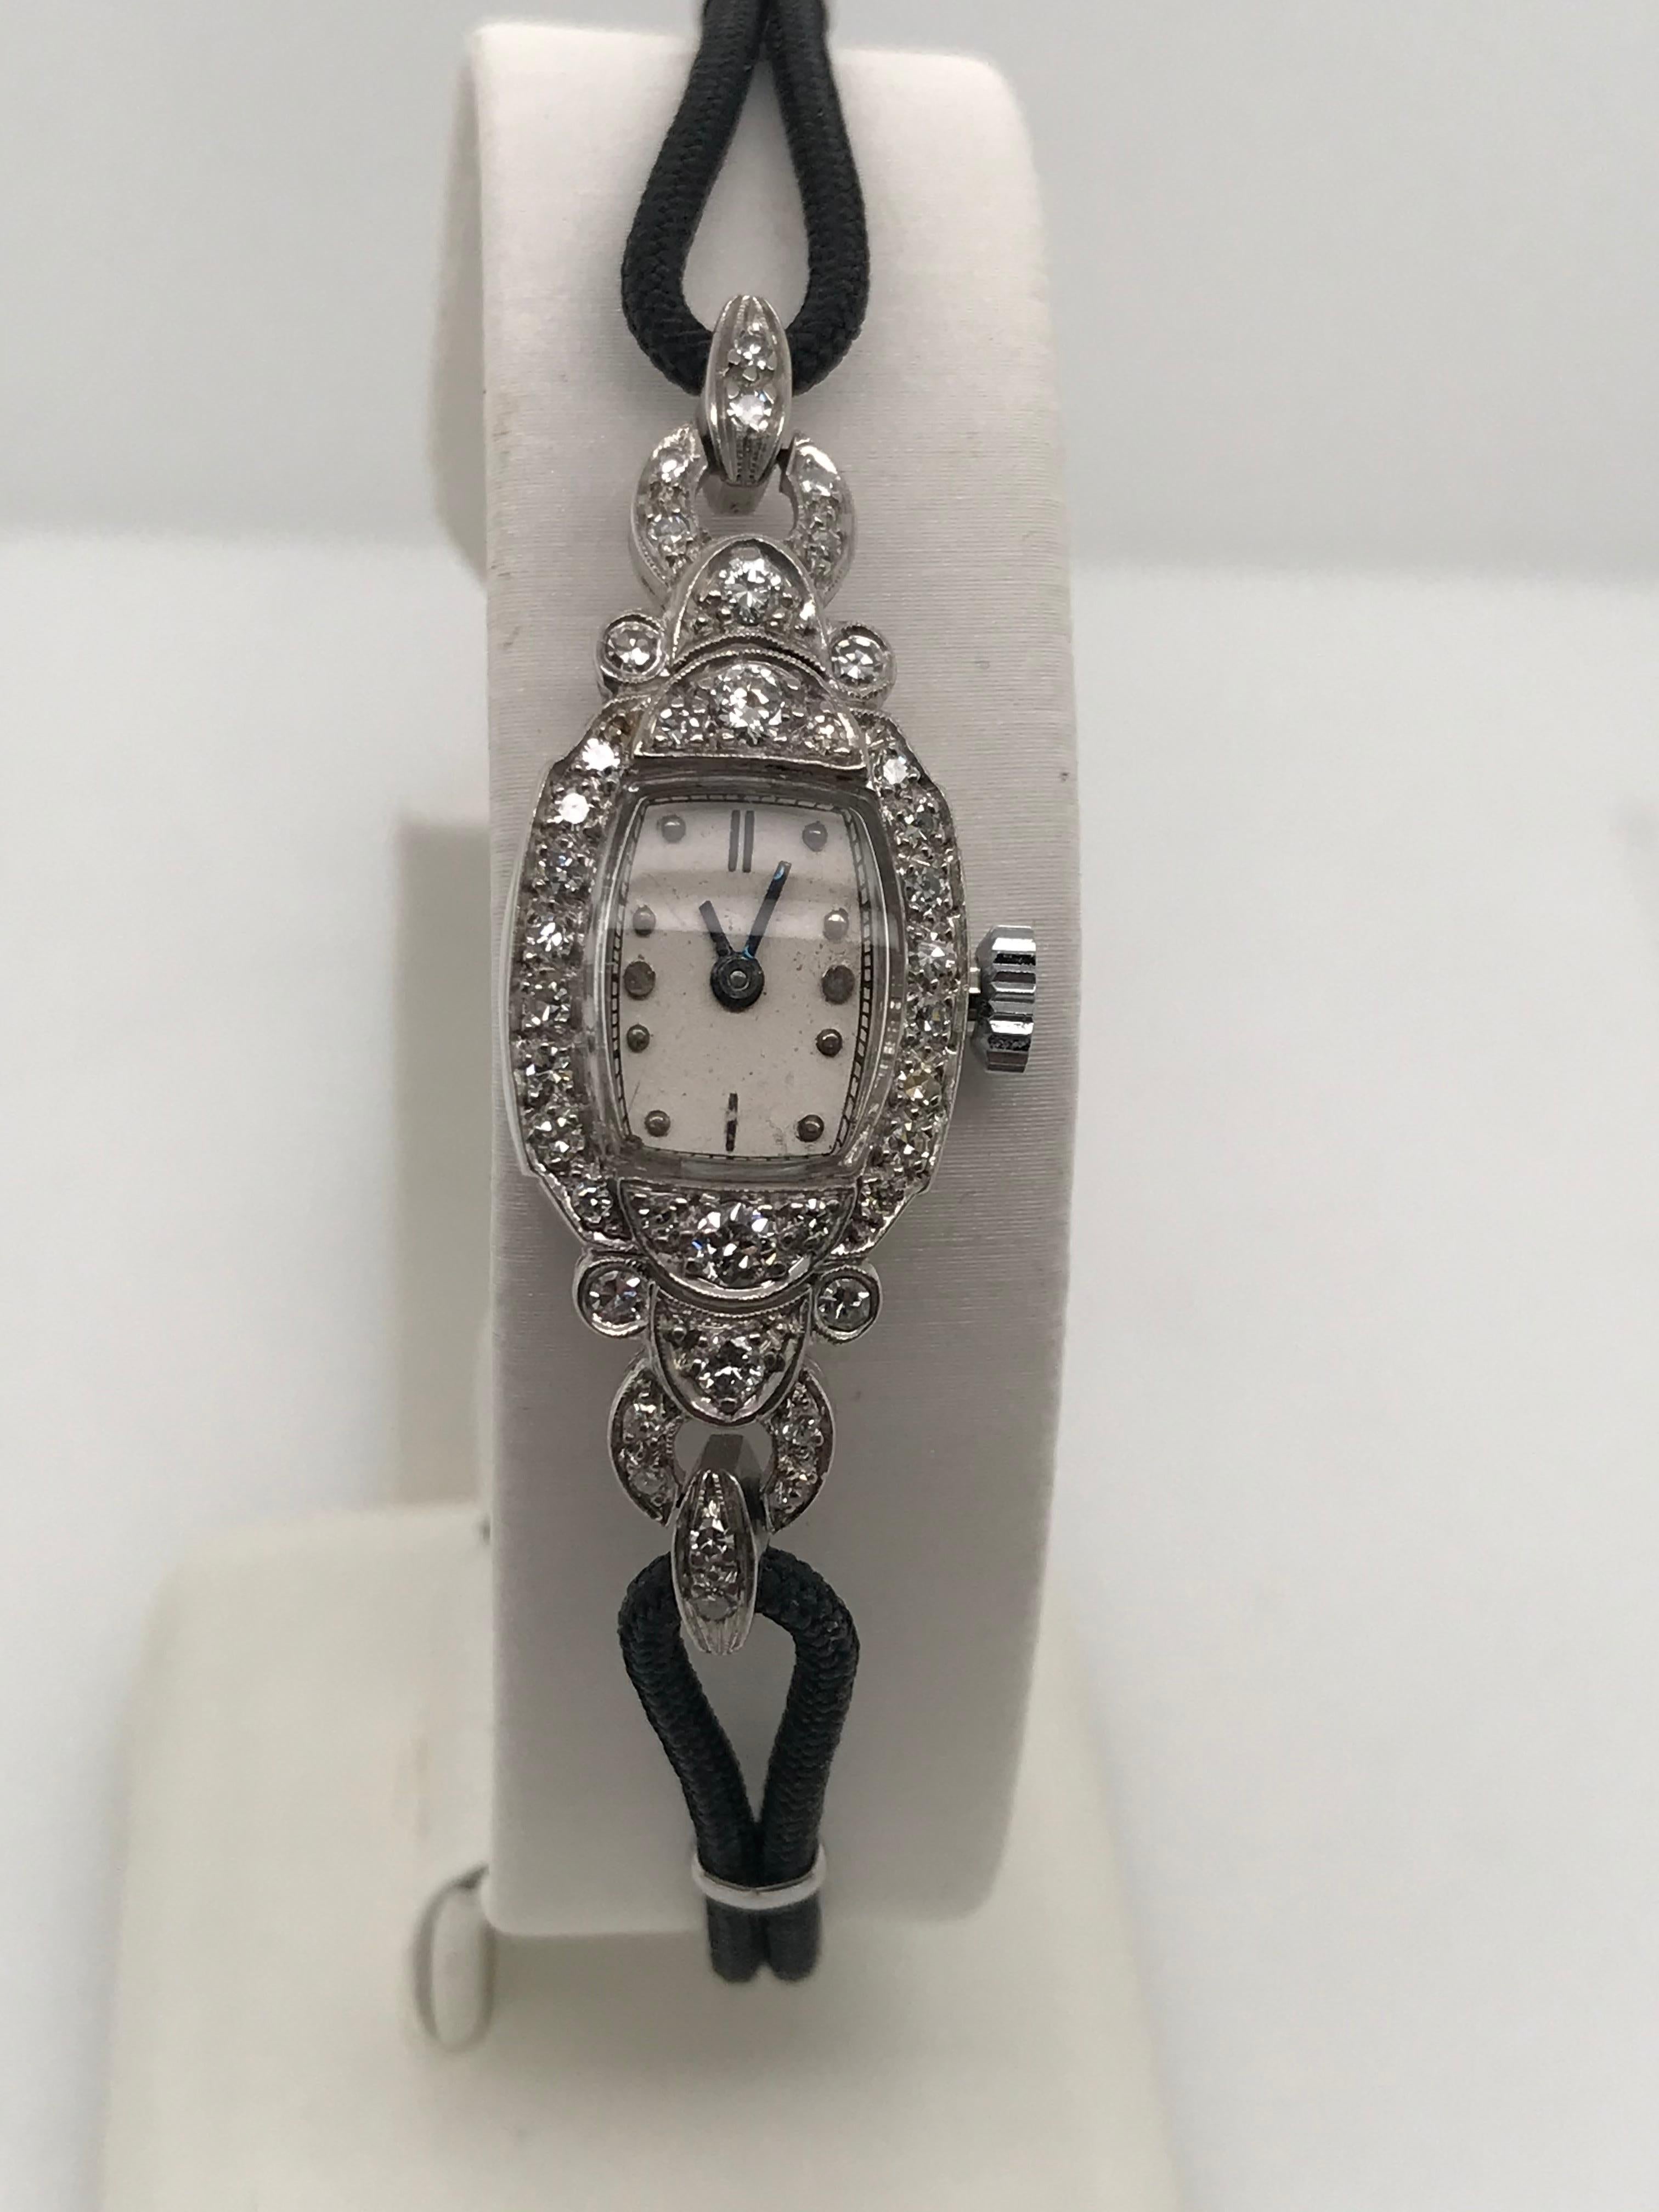 Very rare lady's PALLADIUM Concord watch with a 17 jewel movement.  The watch has 32 single cut diamonds =.64cts and four brilliant cut diamonds=.30cts with a black cord strap.  This elegant watch is secured with a fold over clasp and a safety